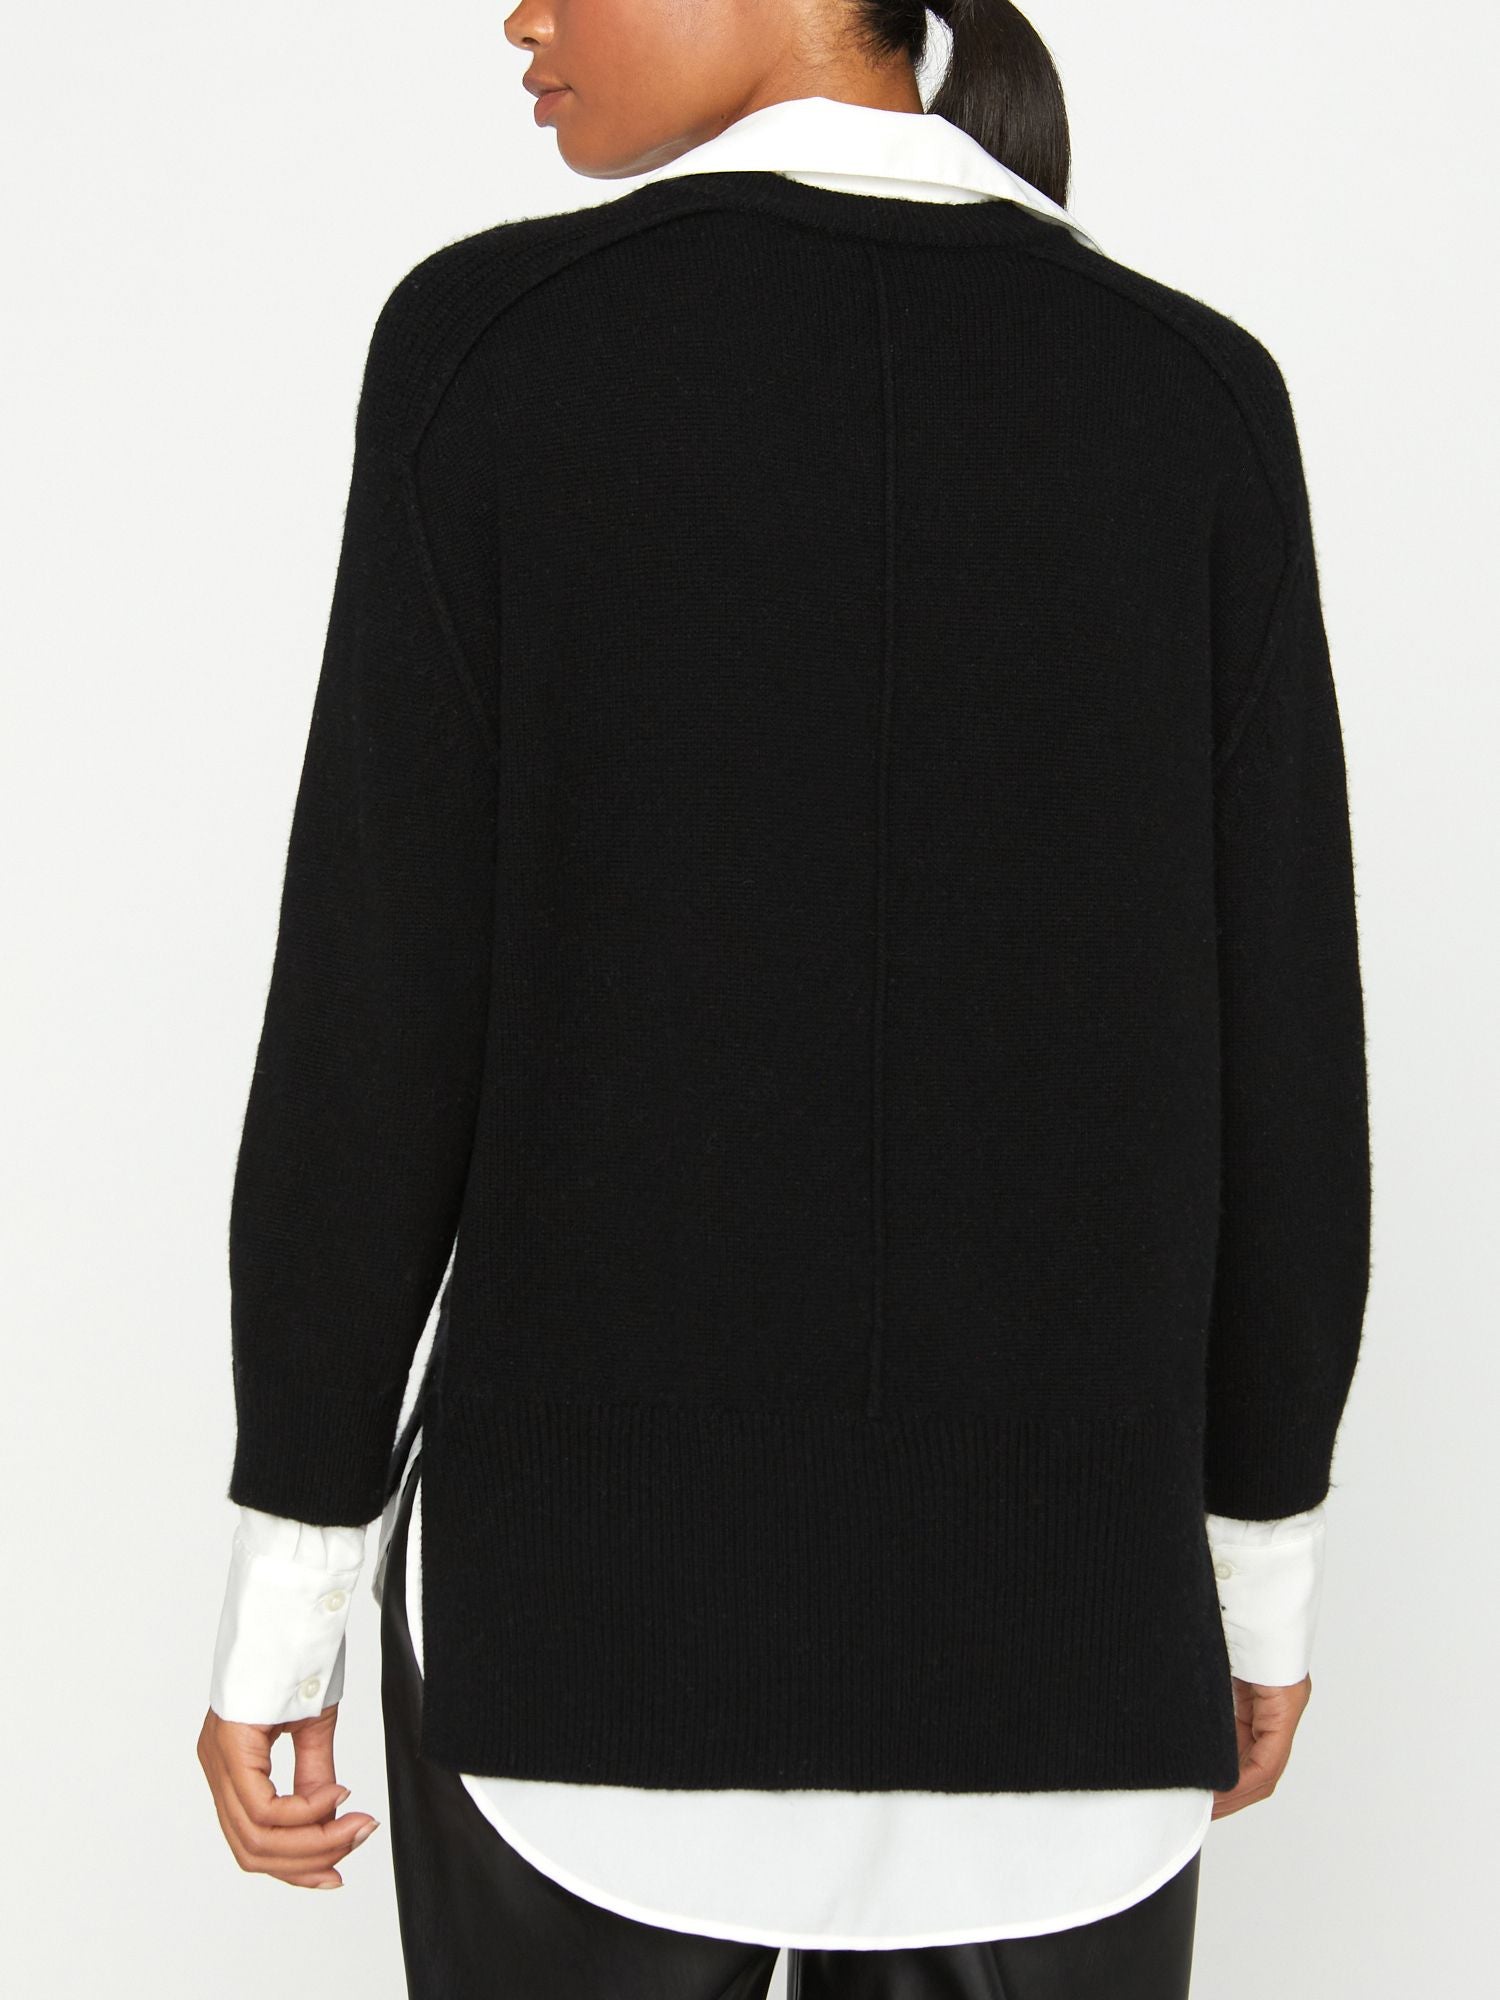 Looker black layered v-neck sweater back view